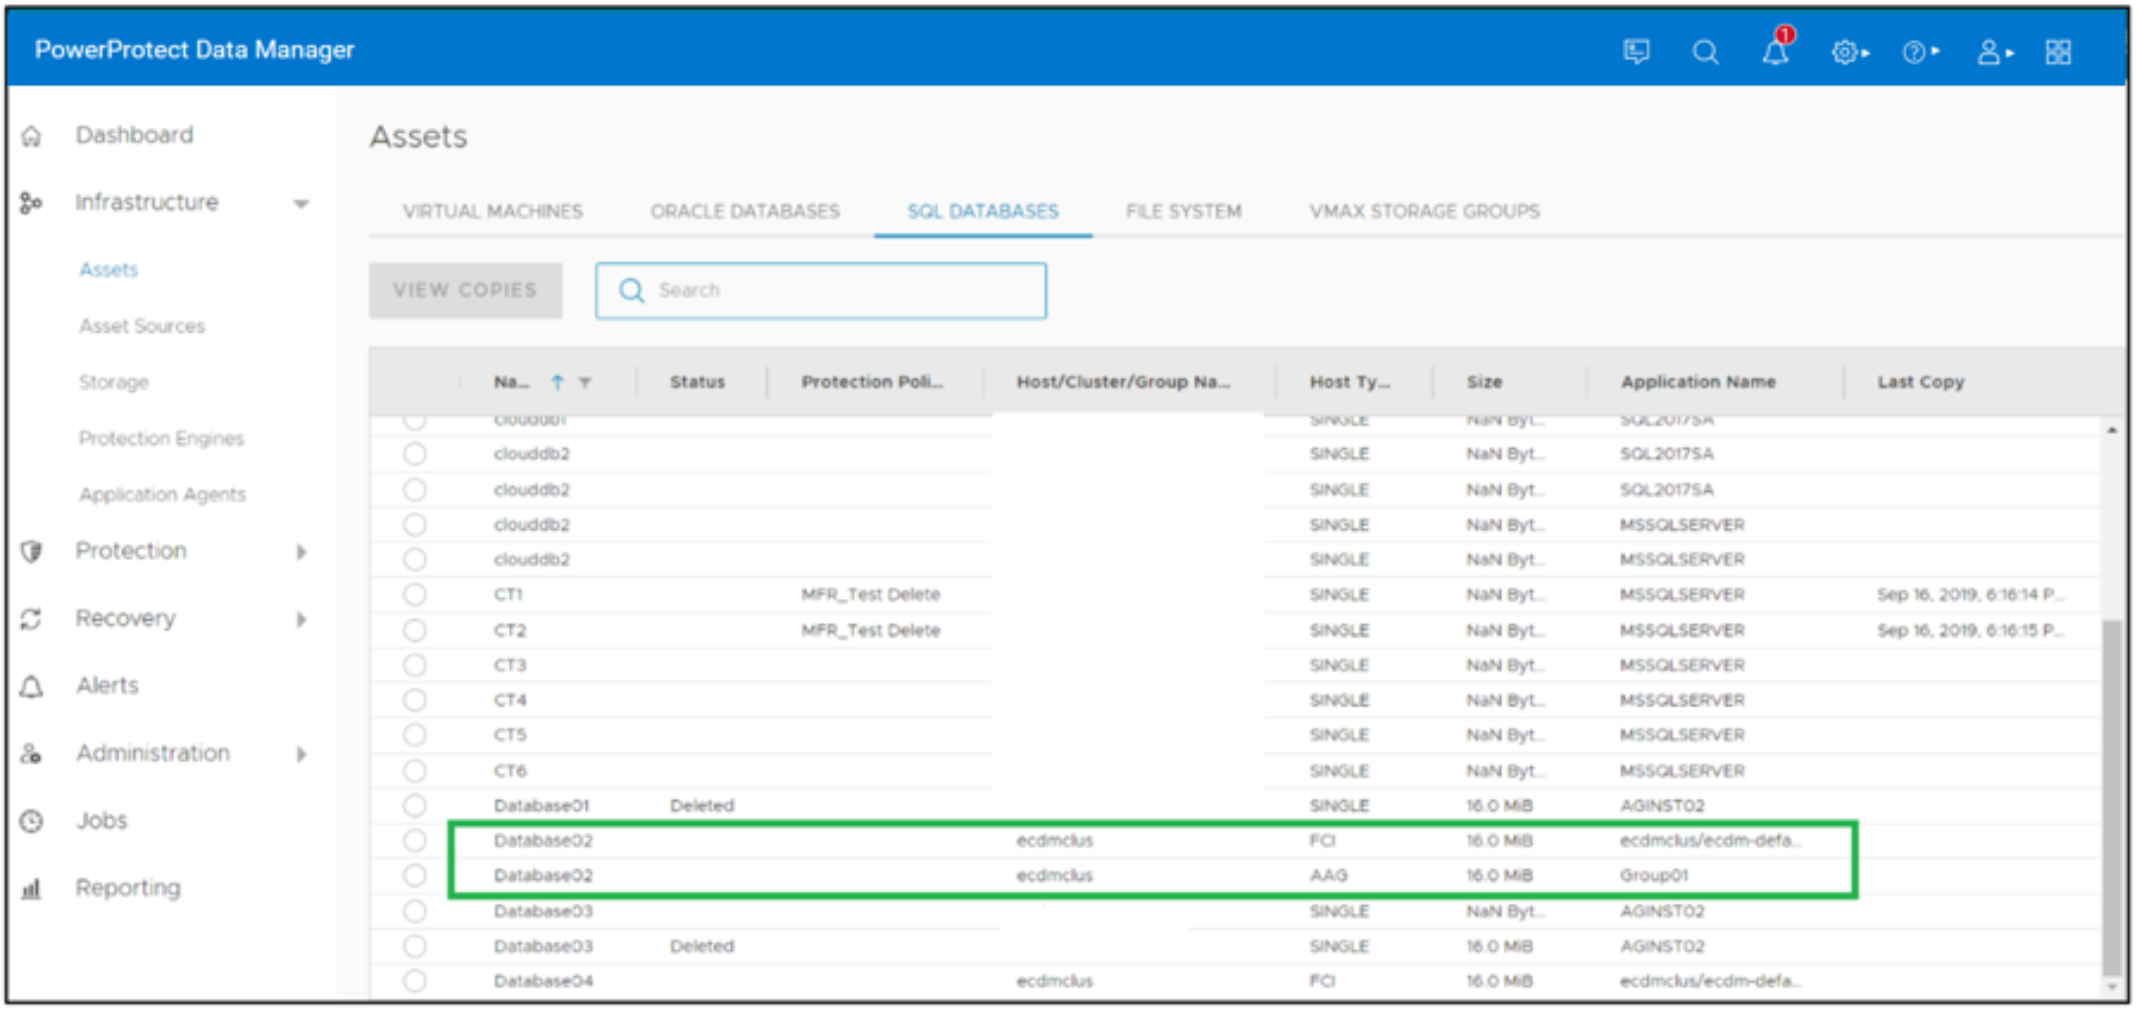 The image shows the Clustered SQL AAG database discovery in Data Manager UI.